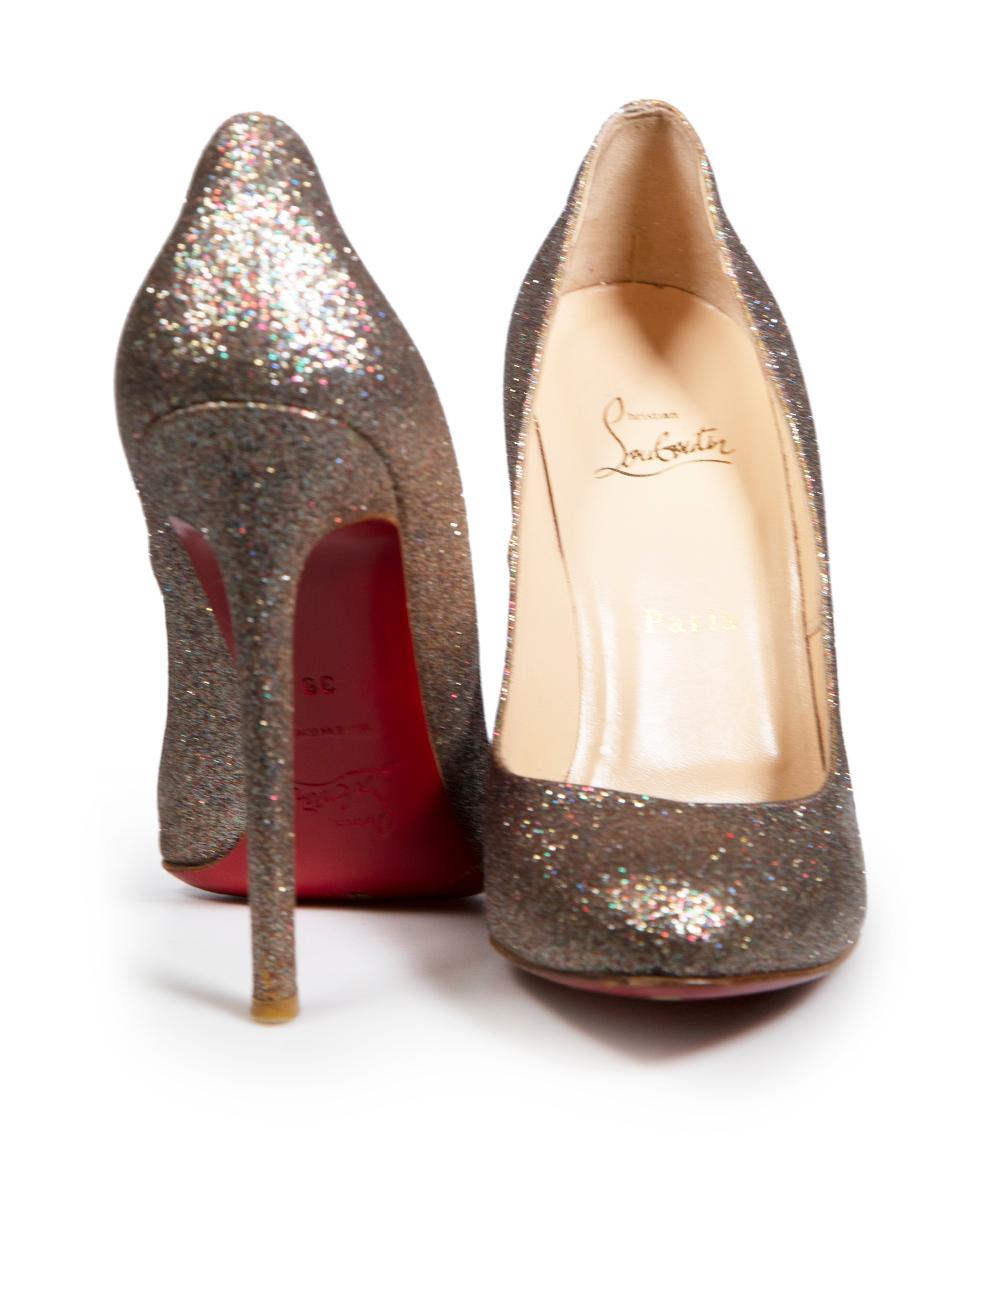 Christian Louboutin Metallic Glitter High Heels Size IT 38 In Good Condition For Sale In London, GB